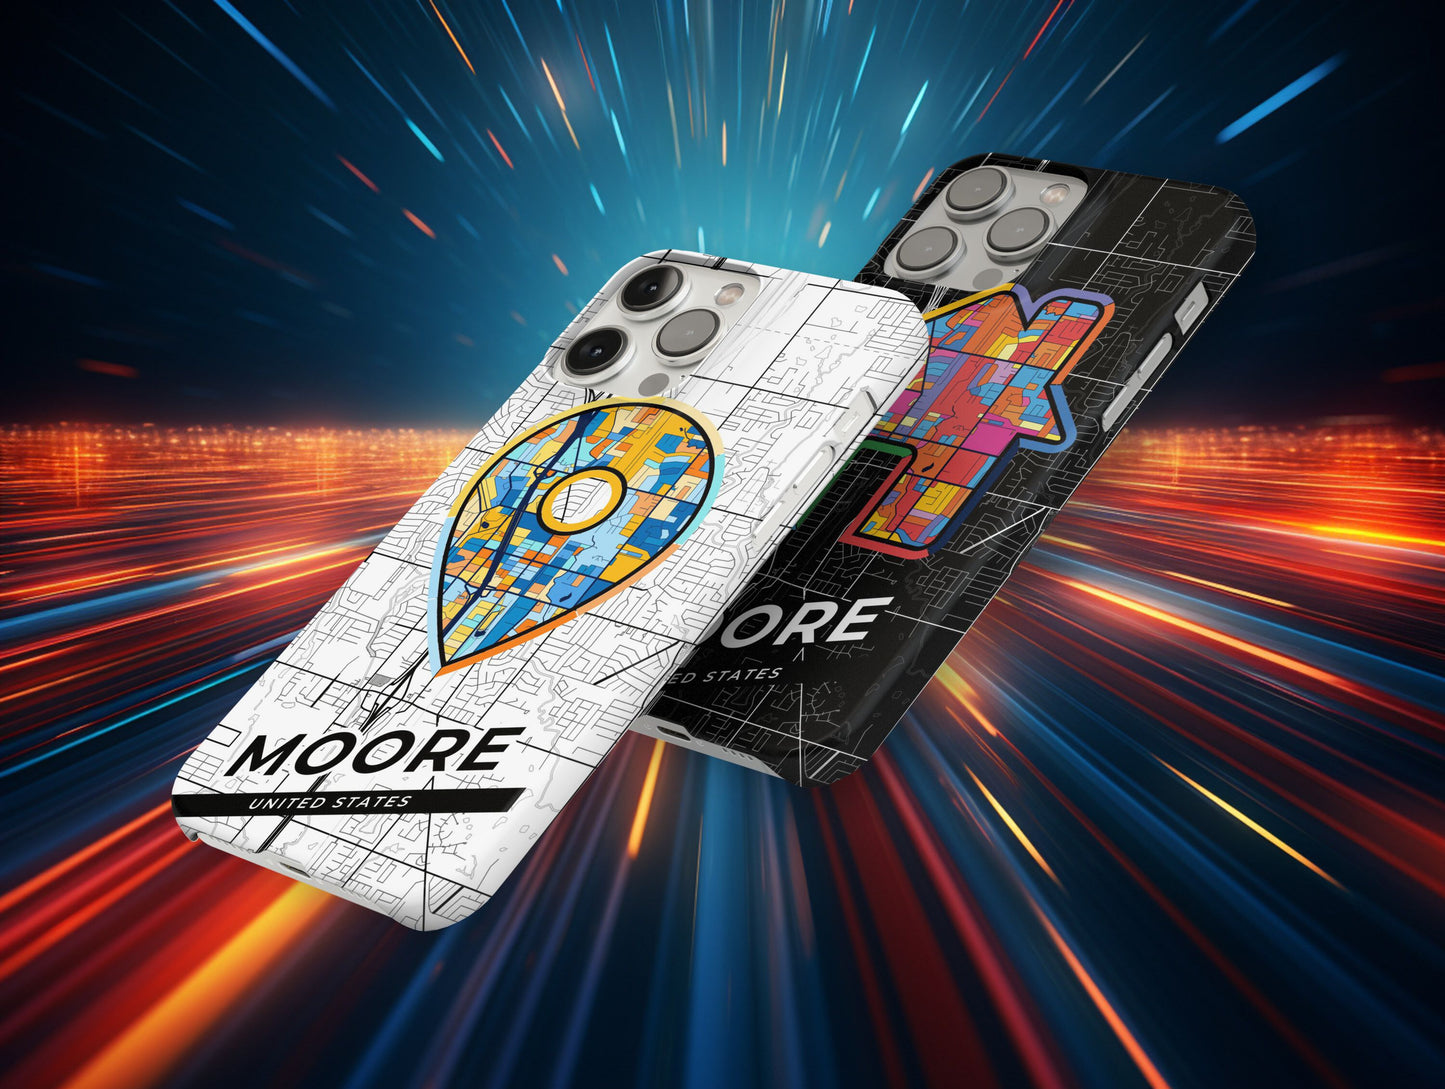 Moore Oklahoma slim phone case with colorful icon